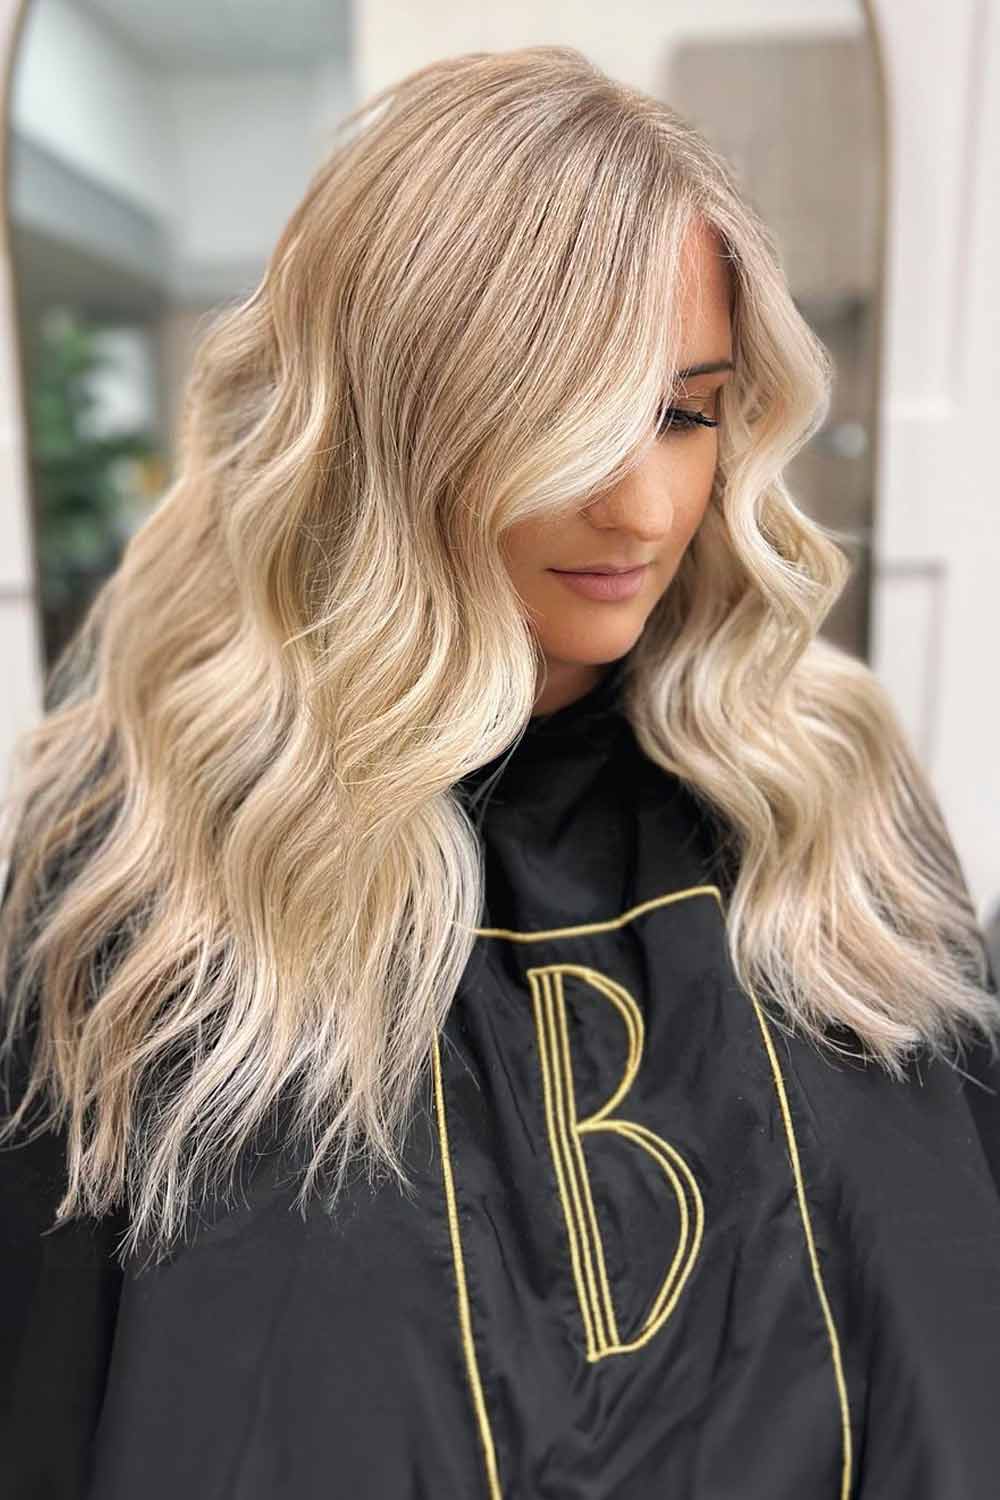 Classic Balayage Blonde Hair #blondehair #blondehaircolor #blonde